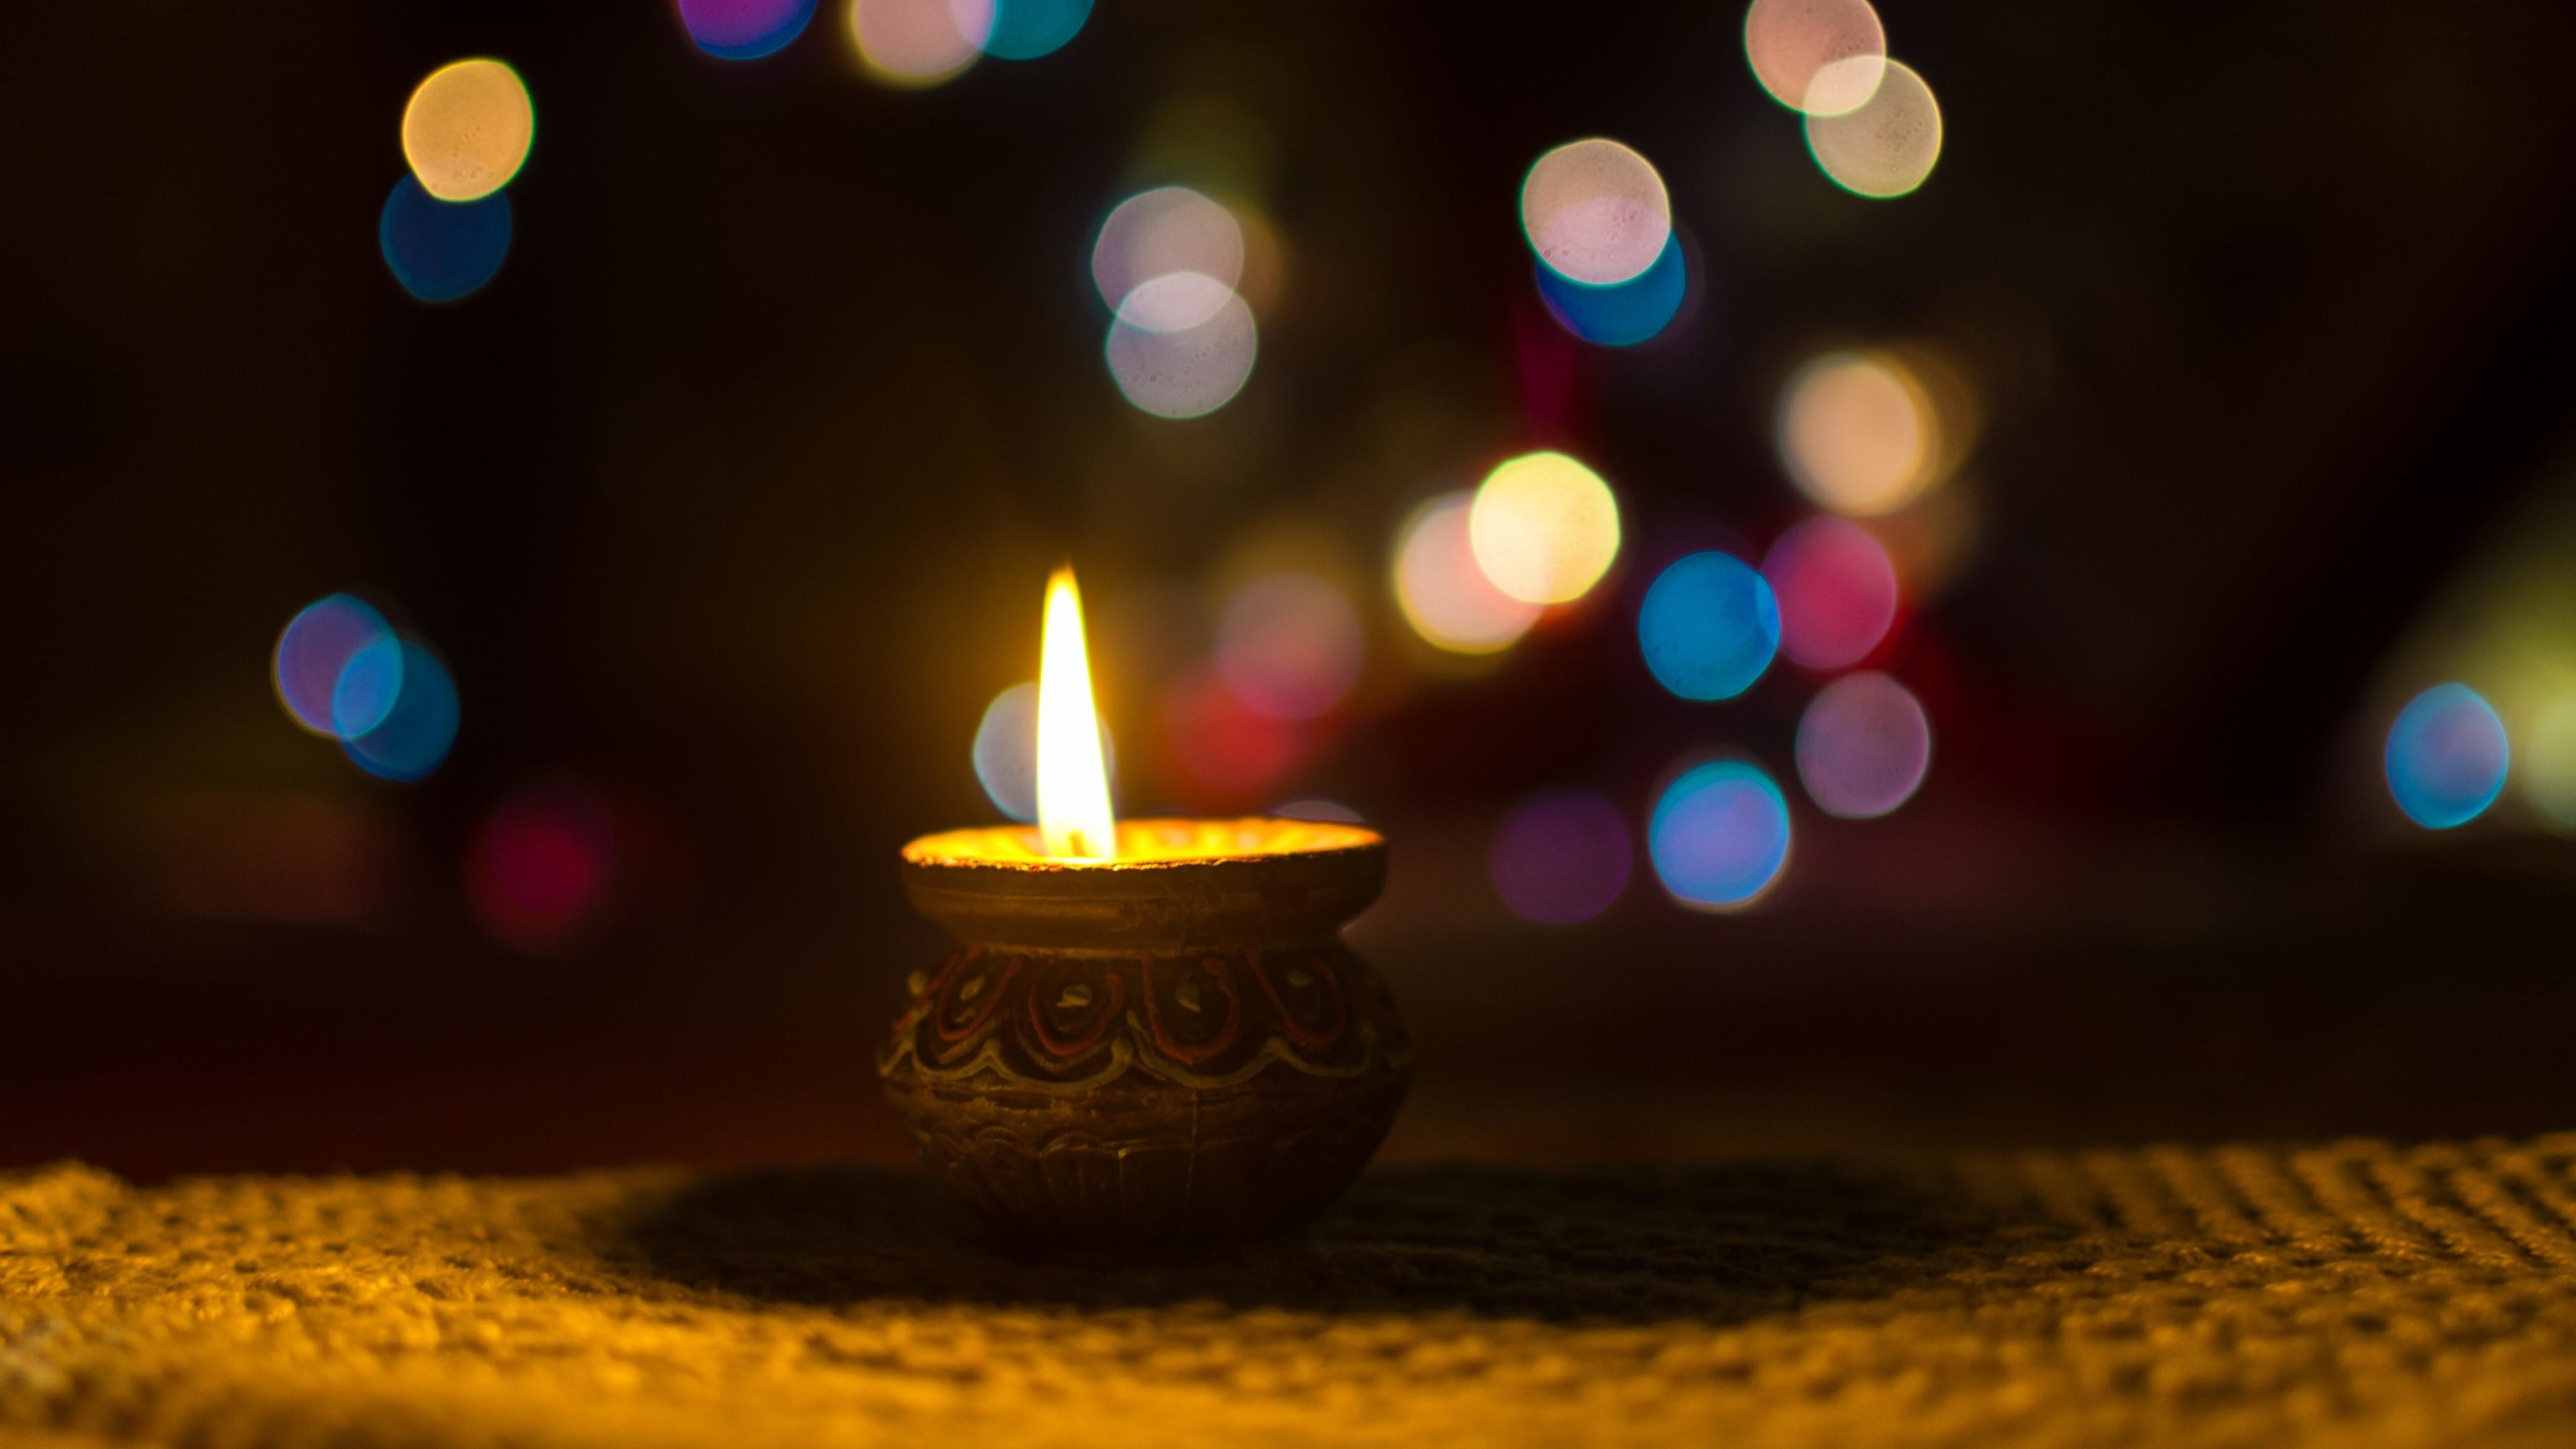 3840x2160, Candlelight With Bokeh Effect Wallpaper - Diwali Captions For Instagram - HD Wallpaper 